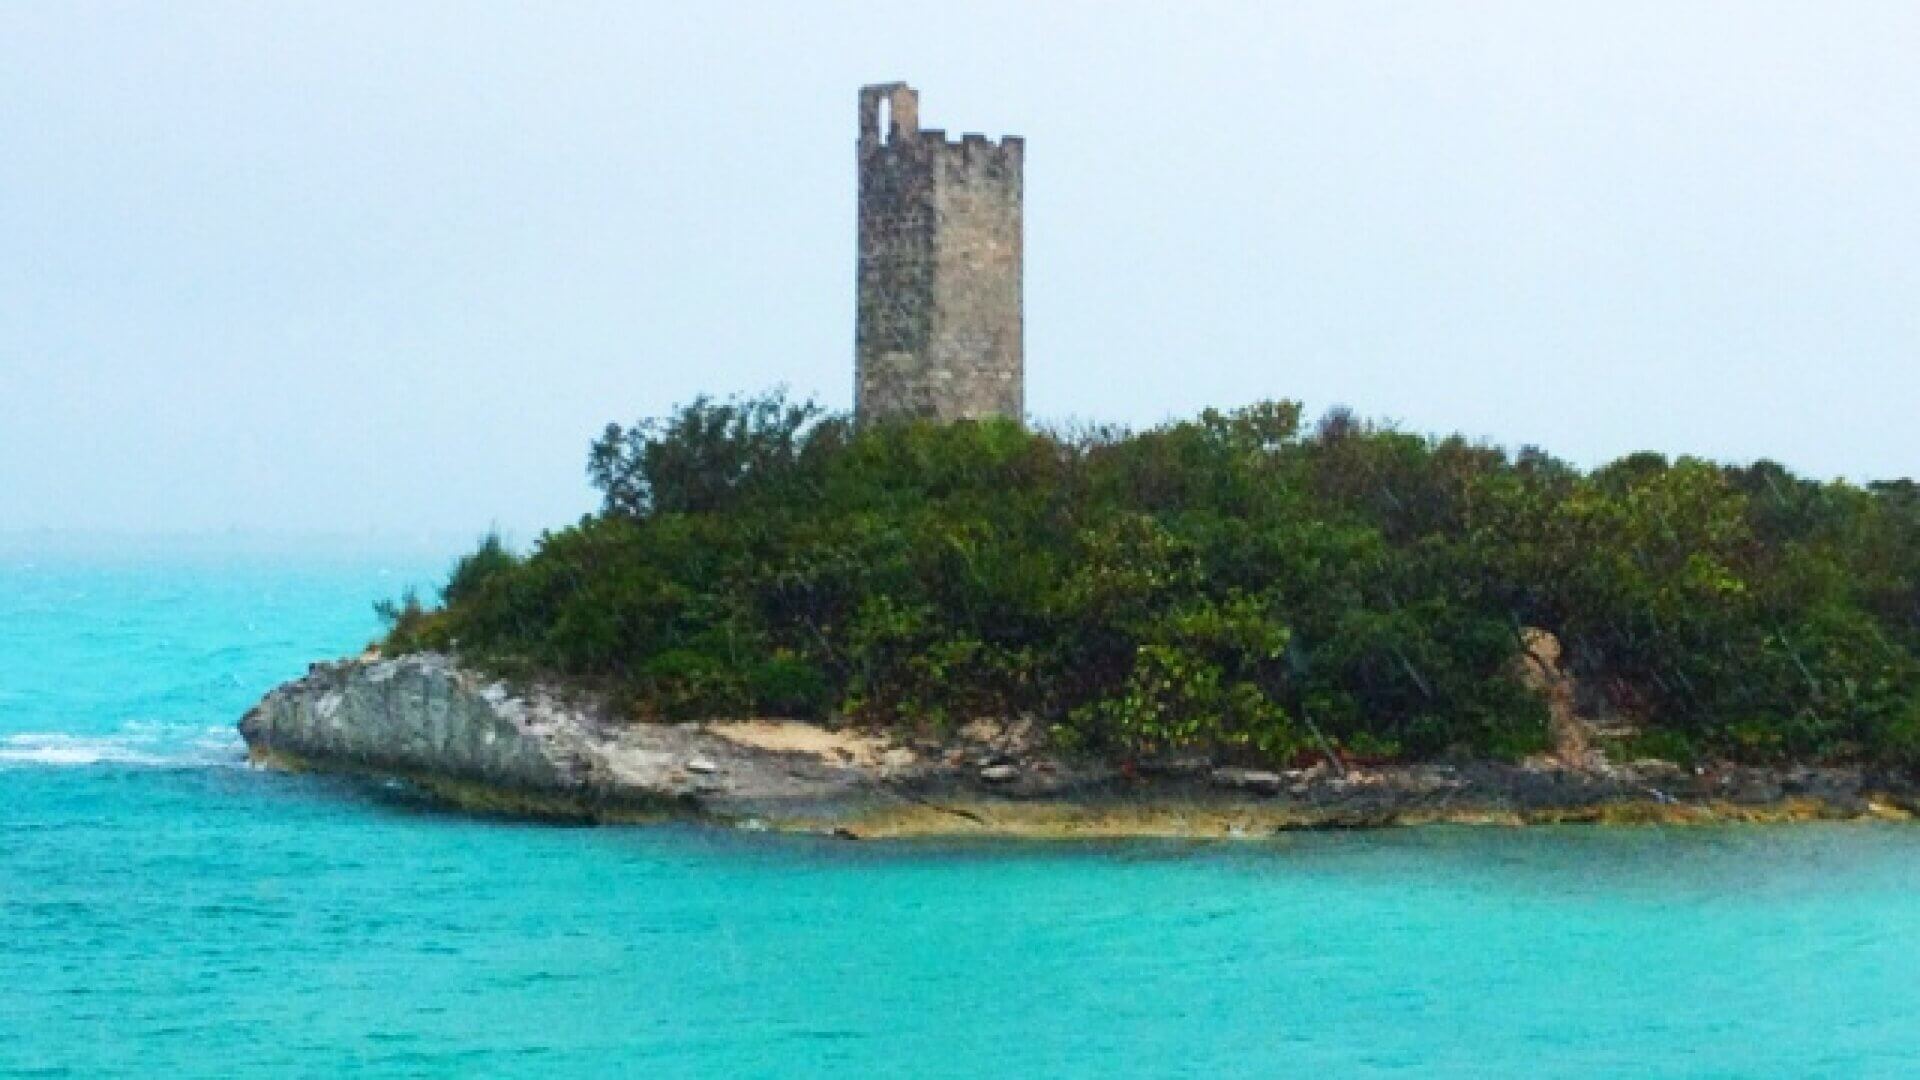 The Blue Lagoon water tower is a truly magnificent sight.